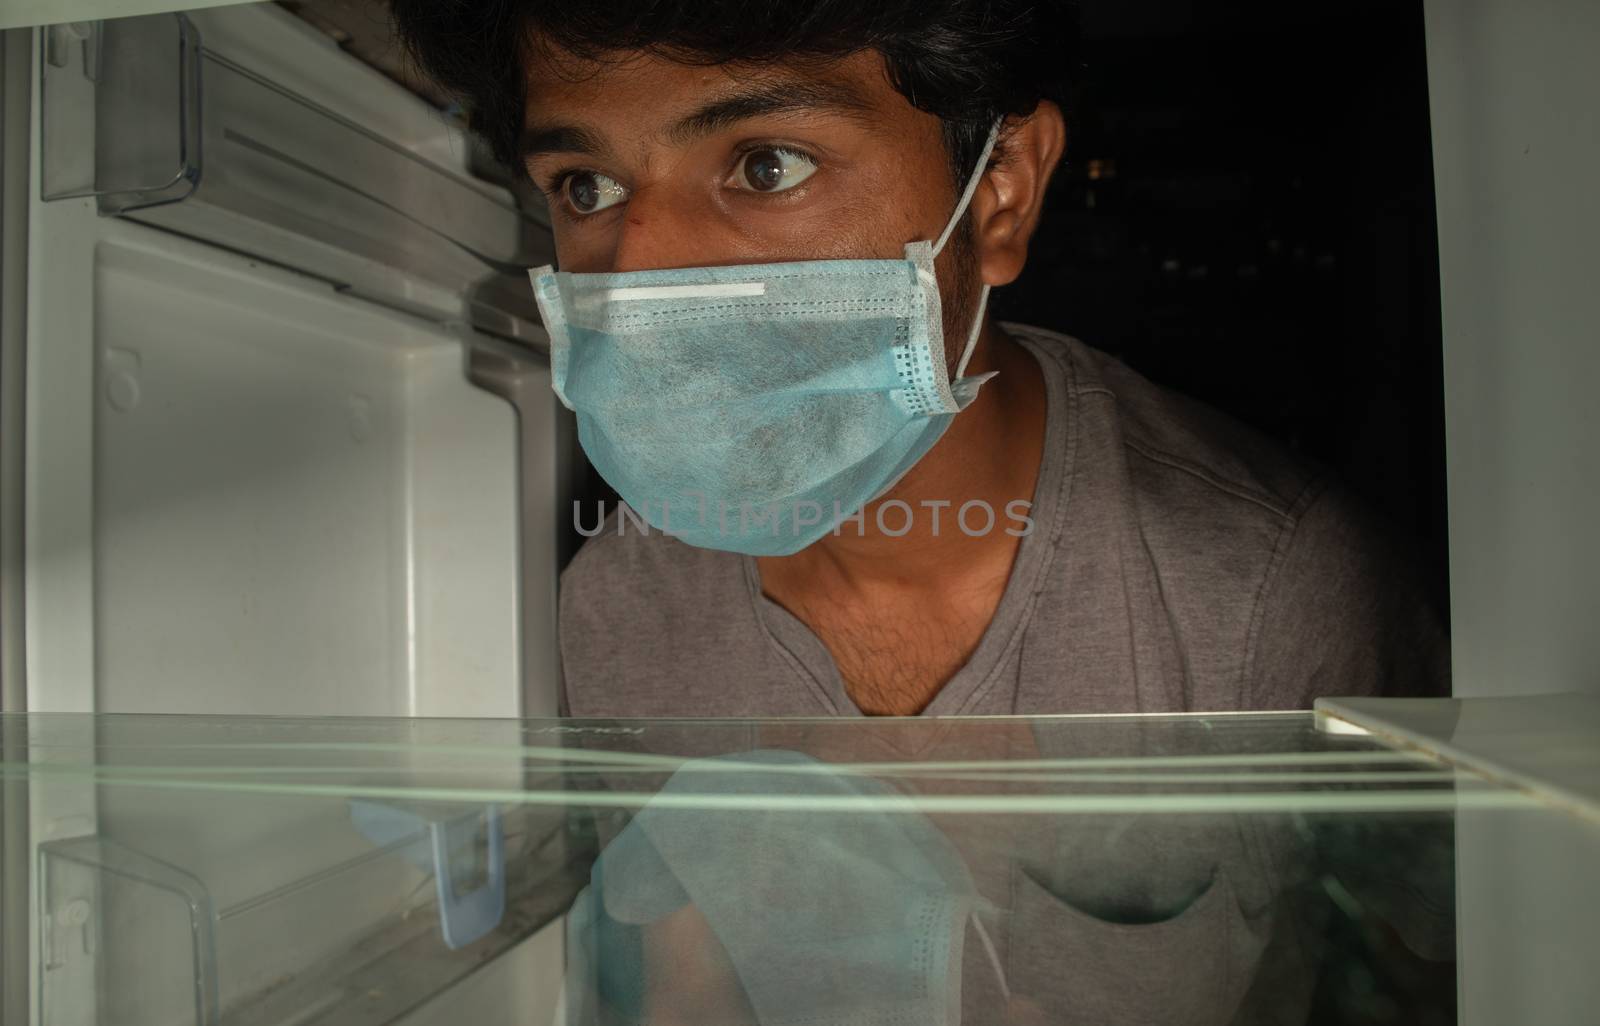 Man in a medical mask looks into empty fridge or refrigerator for food - Concept of no pantry food available during home quarantine at covid-19 or coronavirus